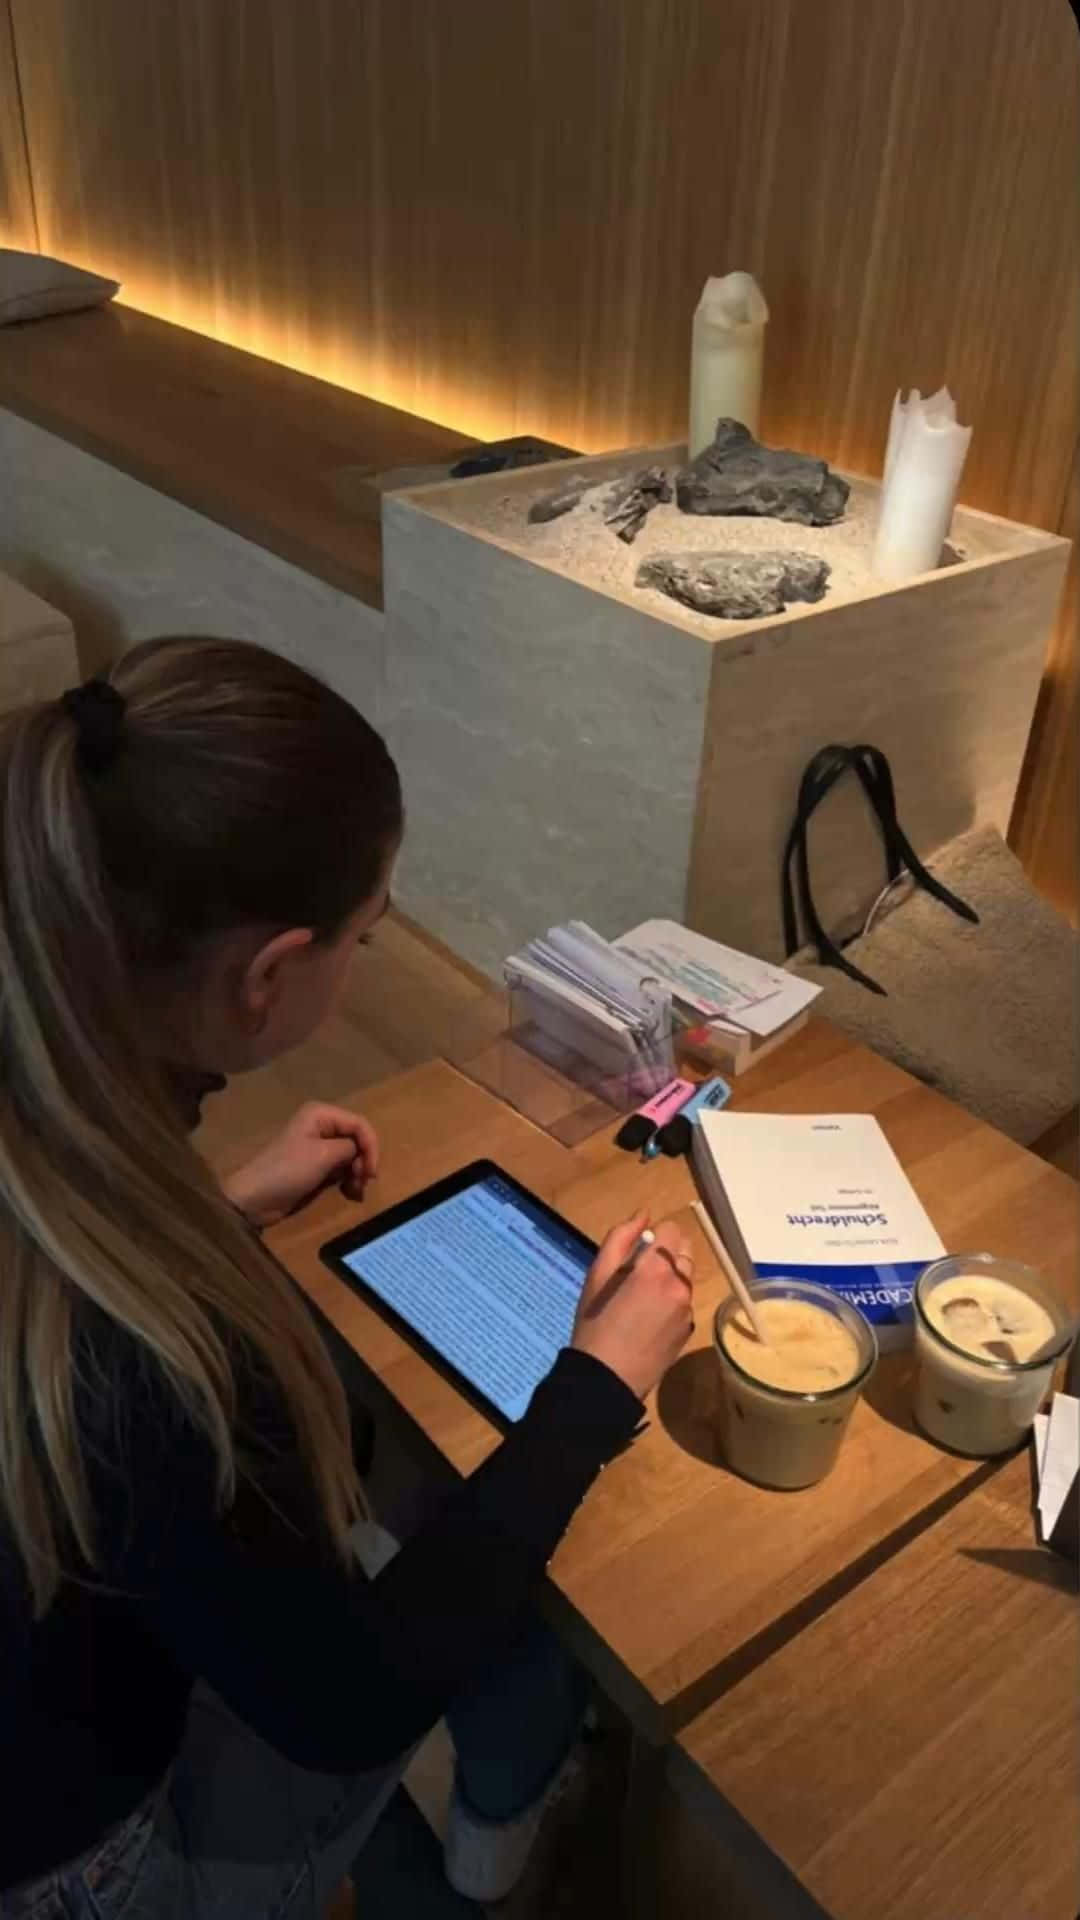 A Woman Is Using An Ipad At A Table